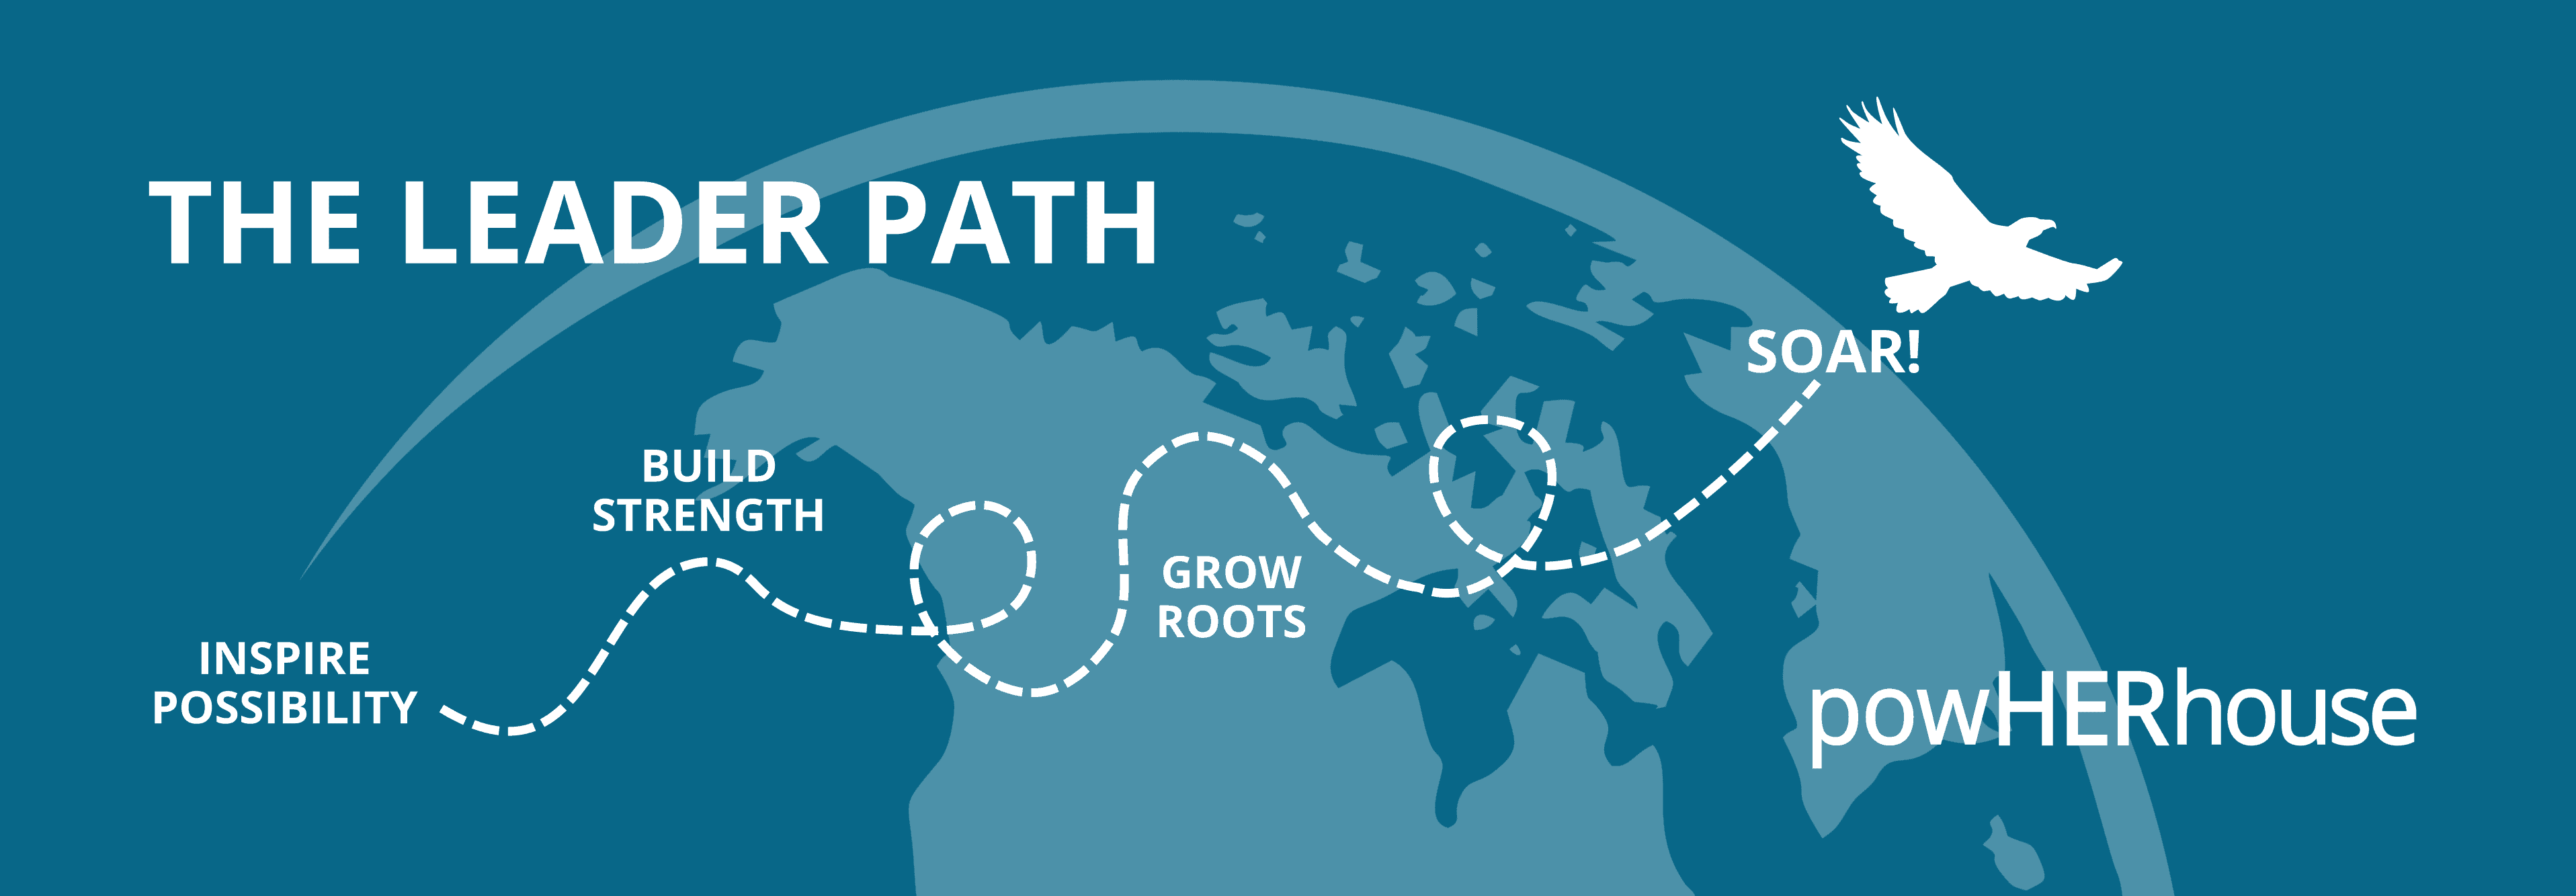 Leader Path -April 2019 with white globe in background